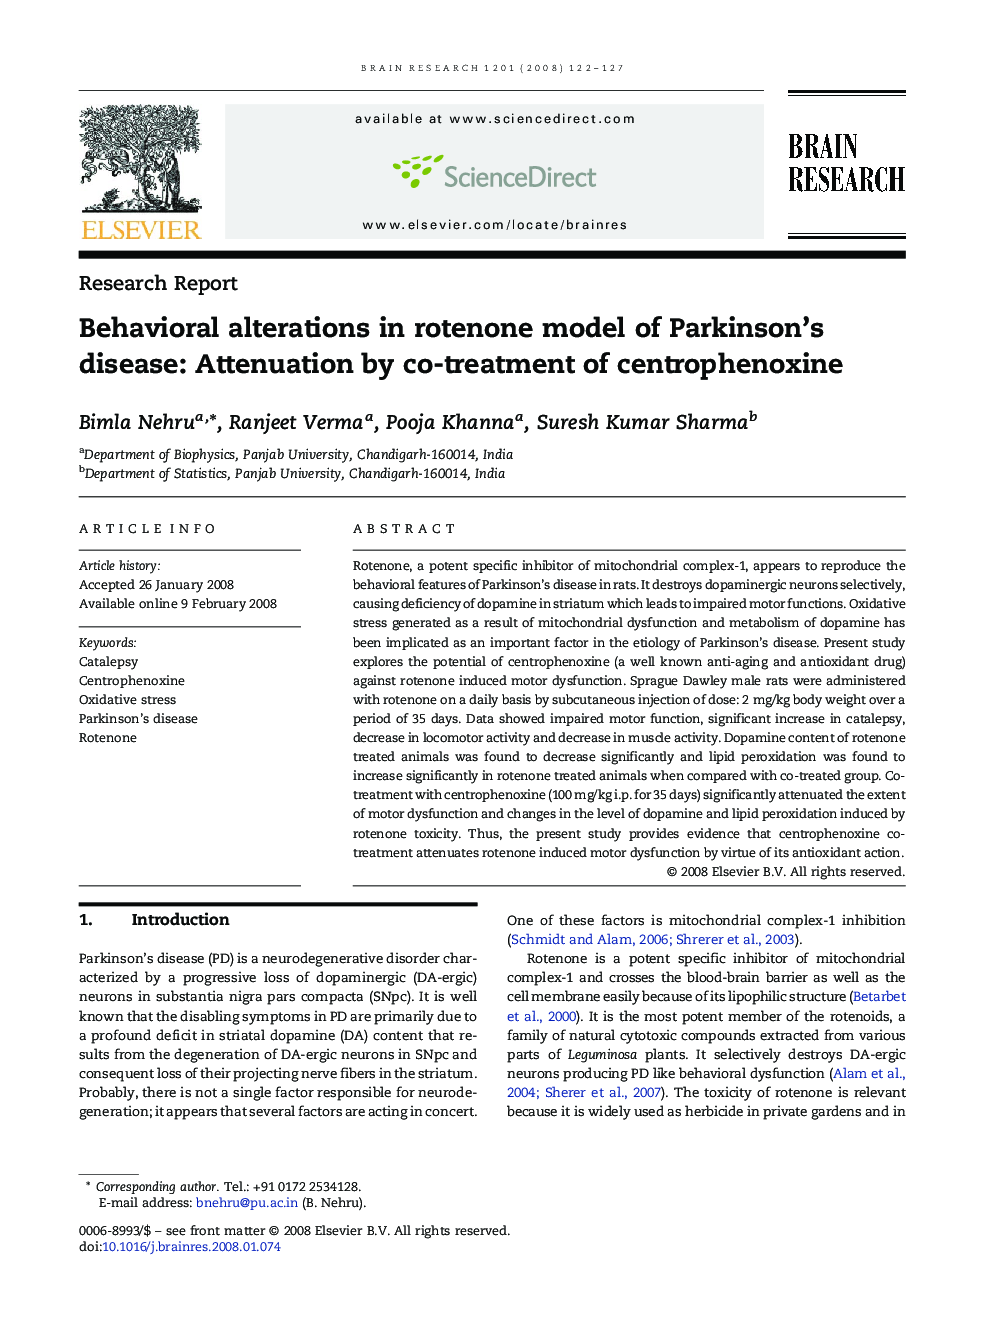 Behavioral alterations in rotenone model of Parkinson's disease: Attenuation by co-treatment of centrophenoxine